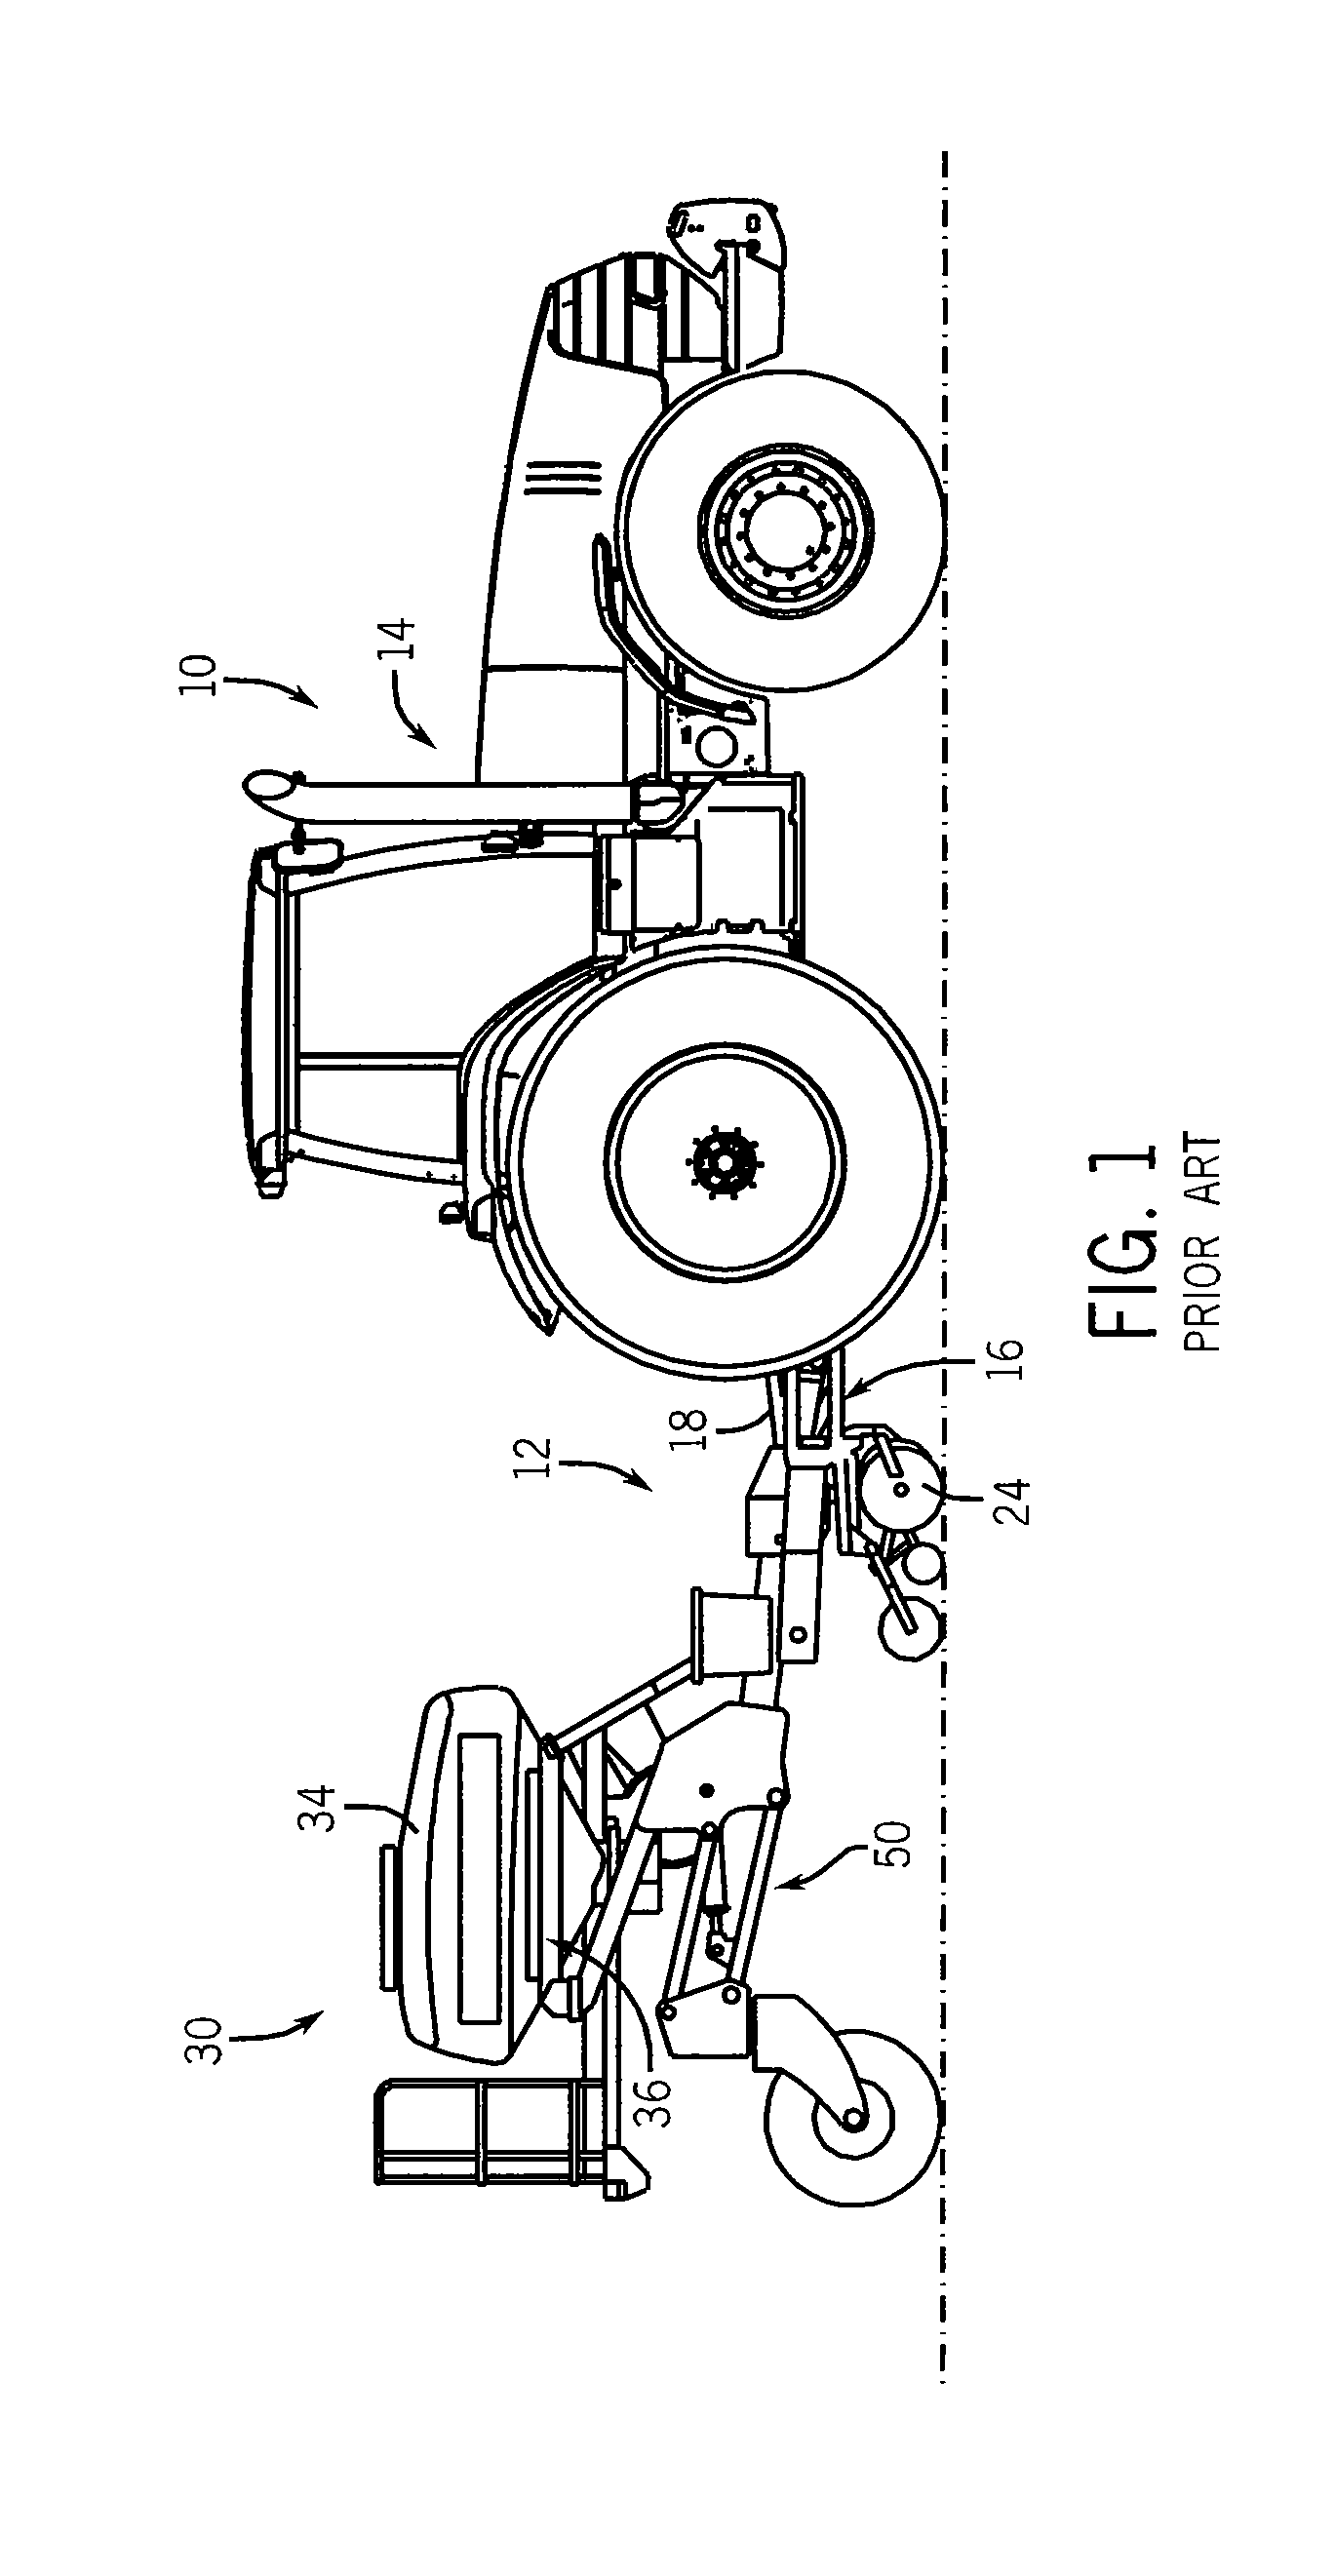 Method And Apparatus For Implement Control Of Tractor Hydraulics Via Isobus Connection